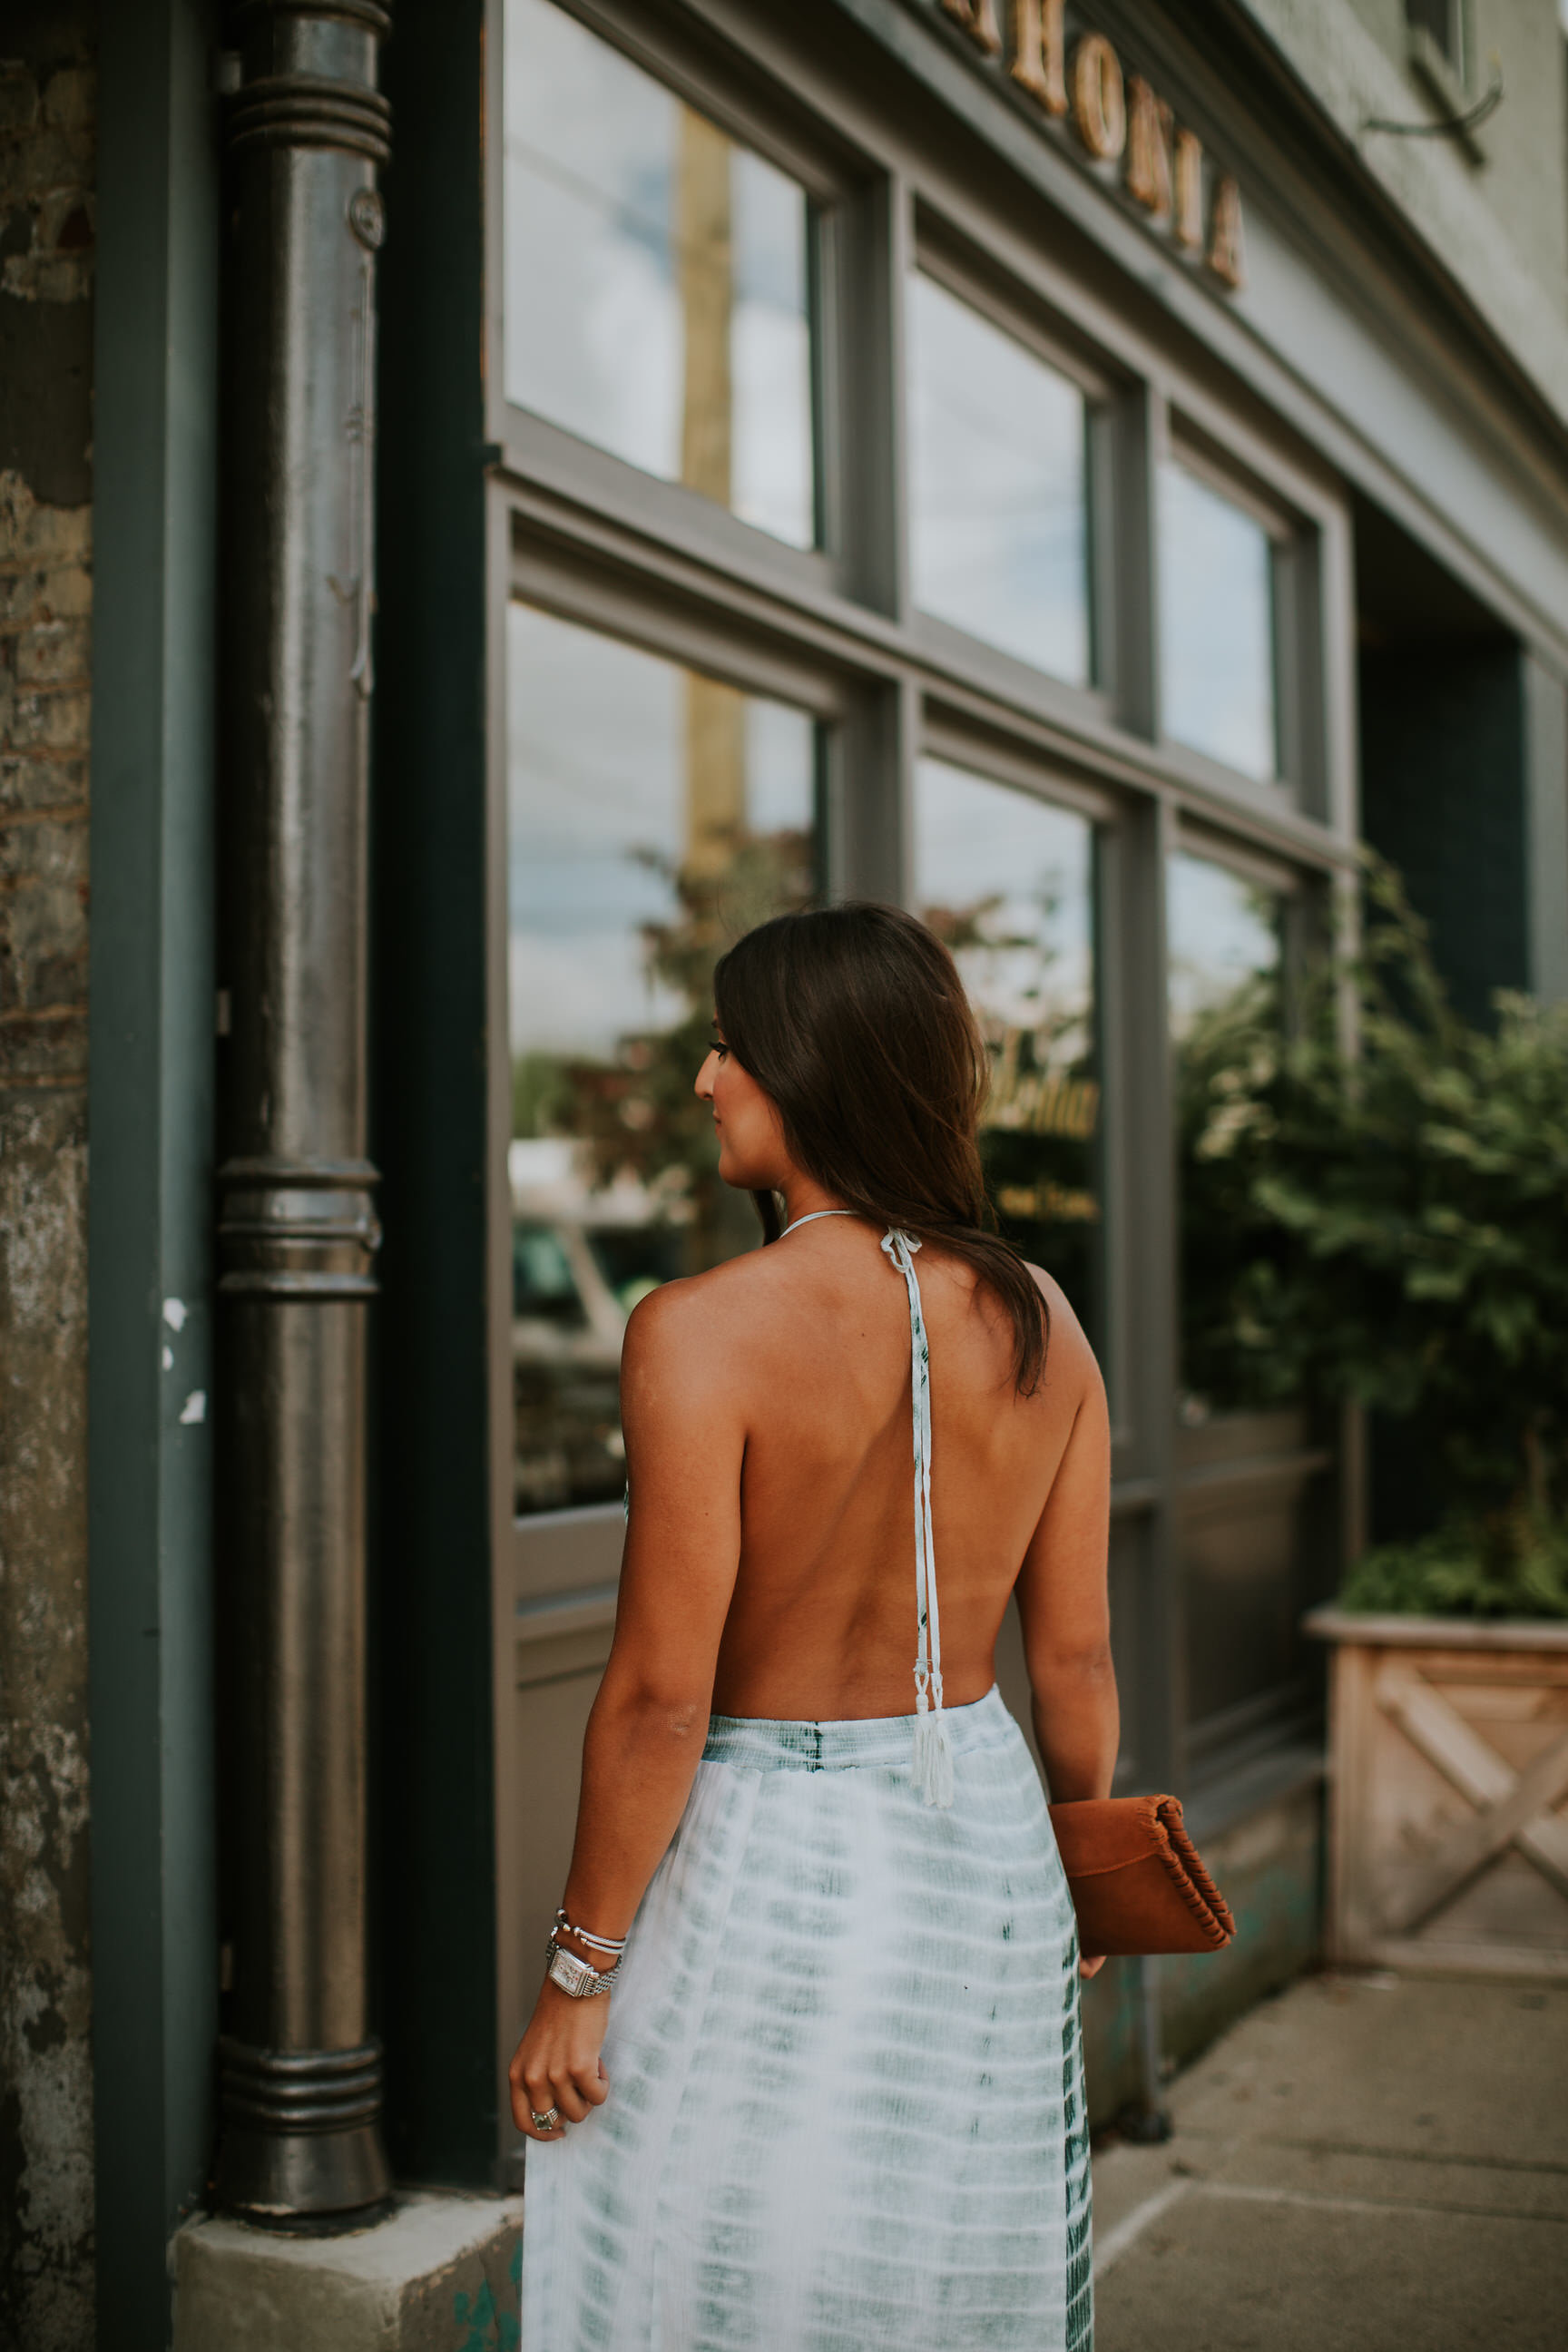 tie dye maxi dress, maxi dresses, summer maxi, nordstrom maxi dresses, red dress maxi dress, sole society clutch, summer outfit, summer style, summer outfit ideas // grace wainwright a southern drawl